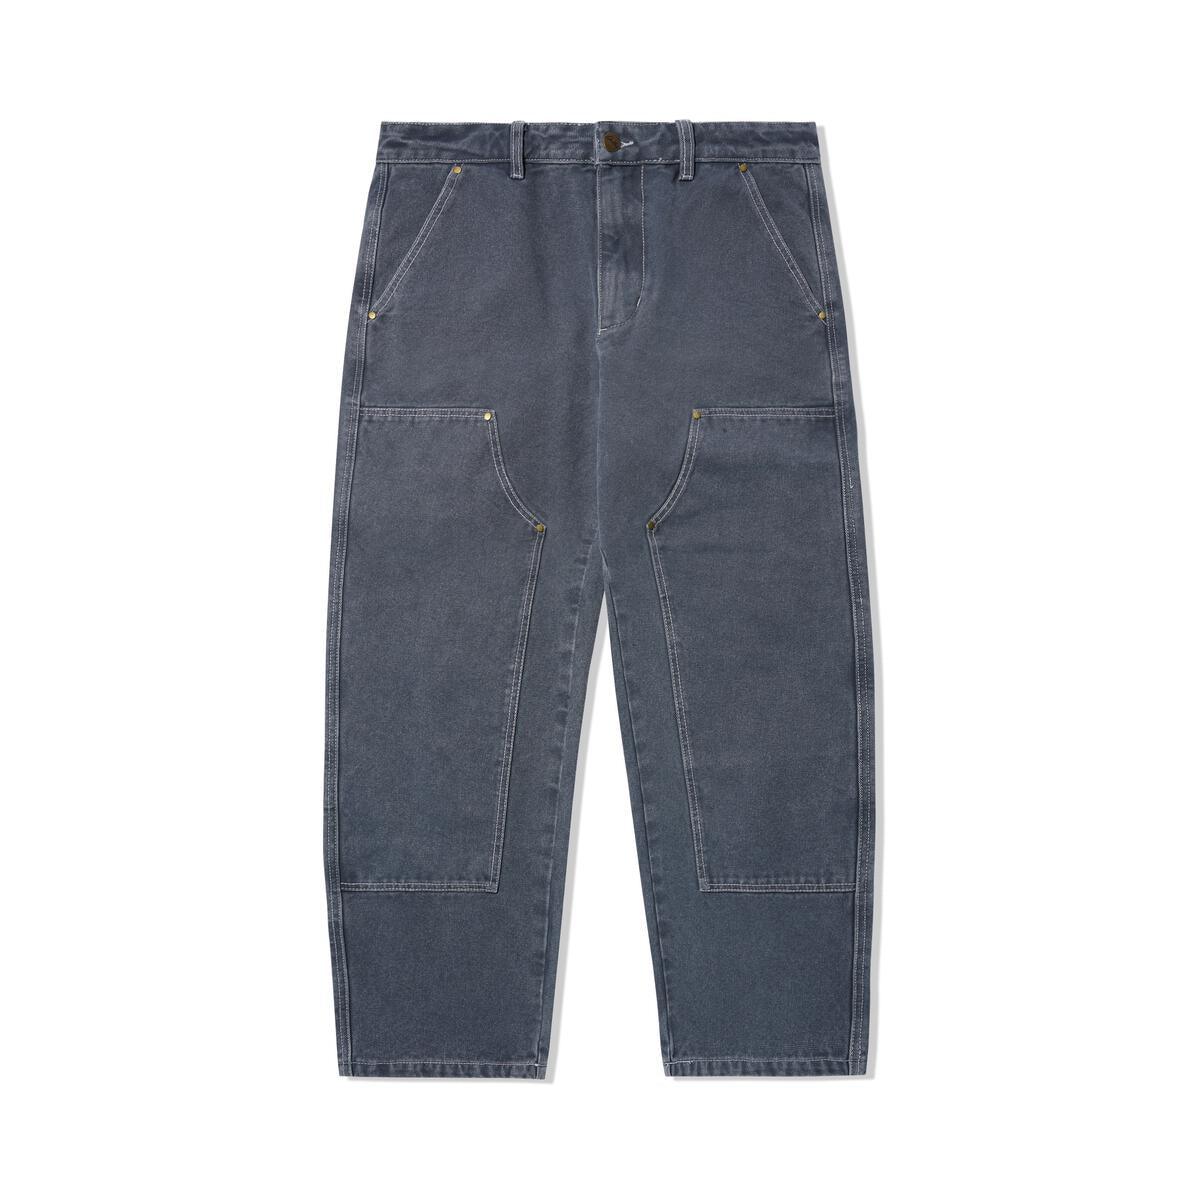 Butter Goods Washed Canvas Double Knee Pants - Slate